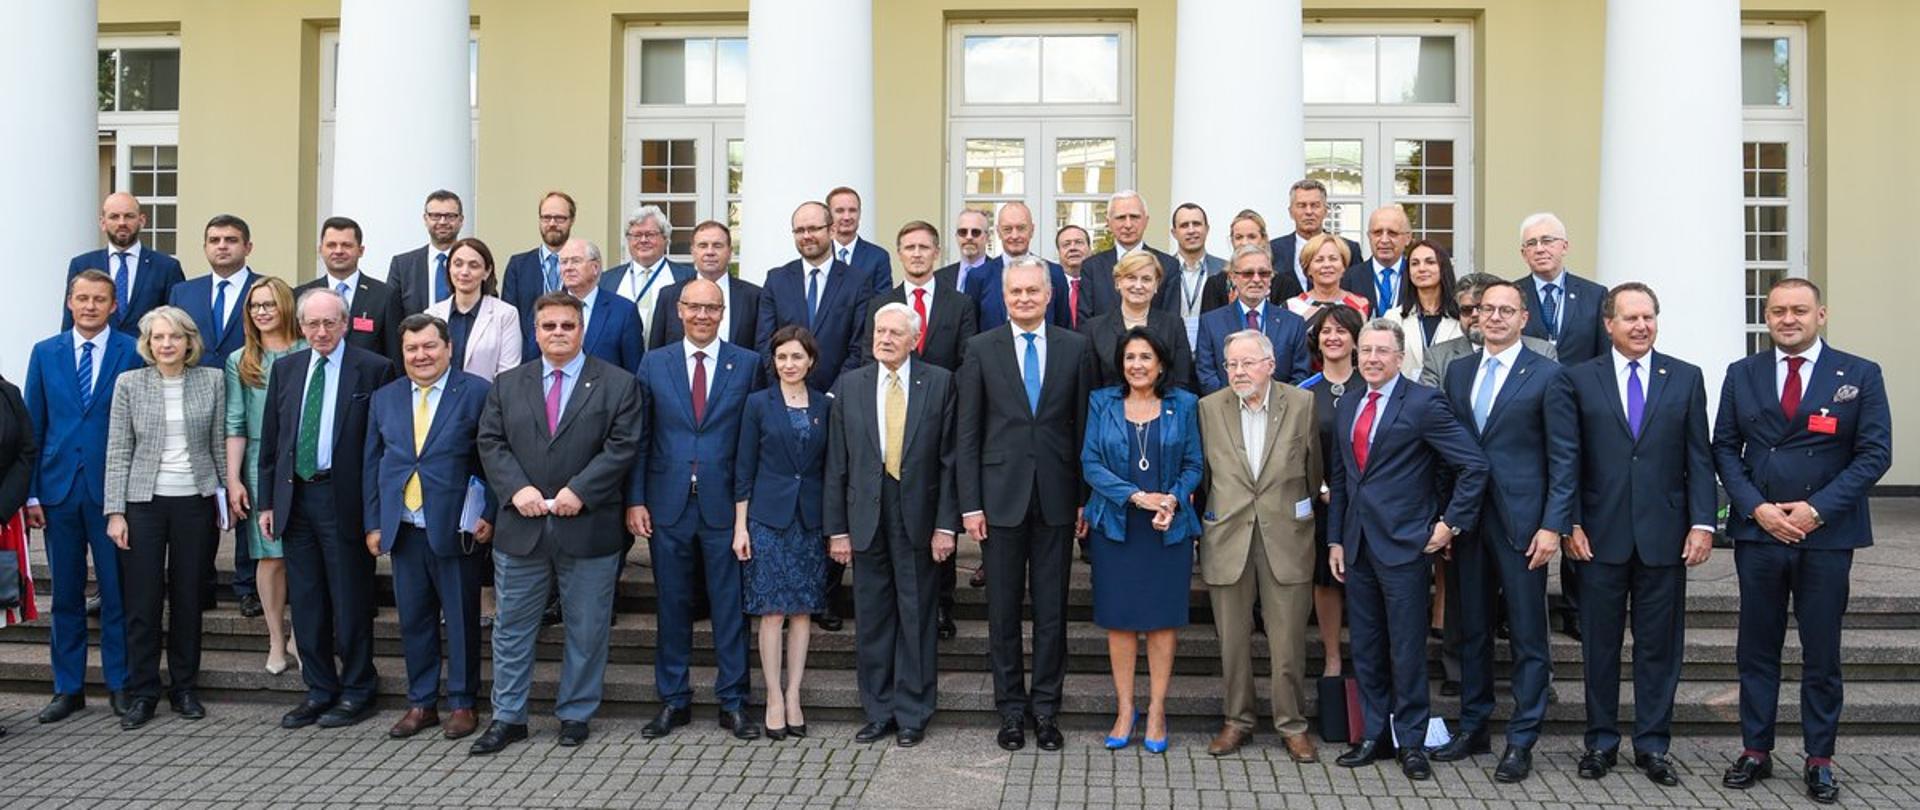 Undersecretary of State Marcin Przydacz visited Lithuania on 21-24 August 2019